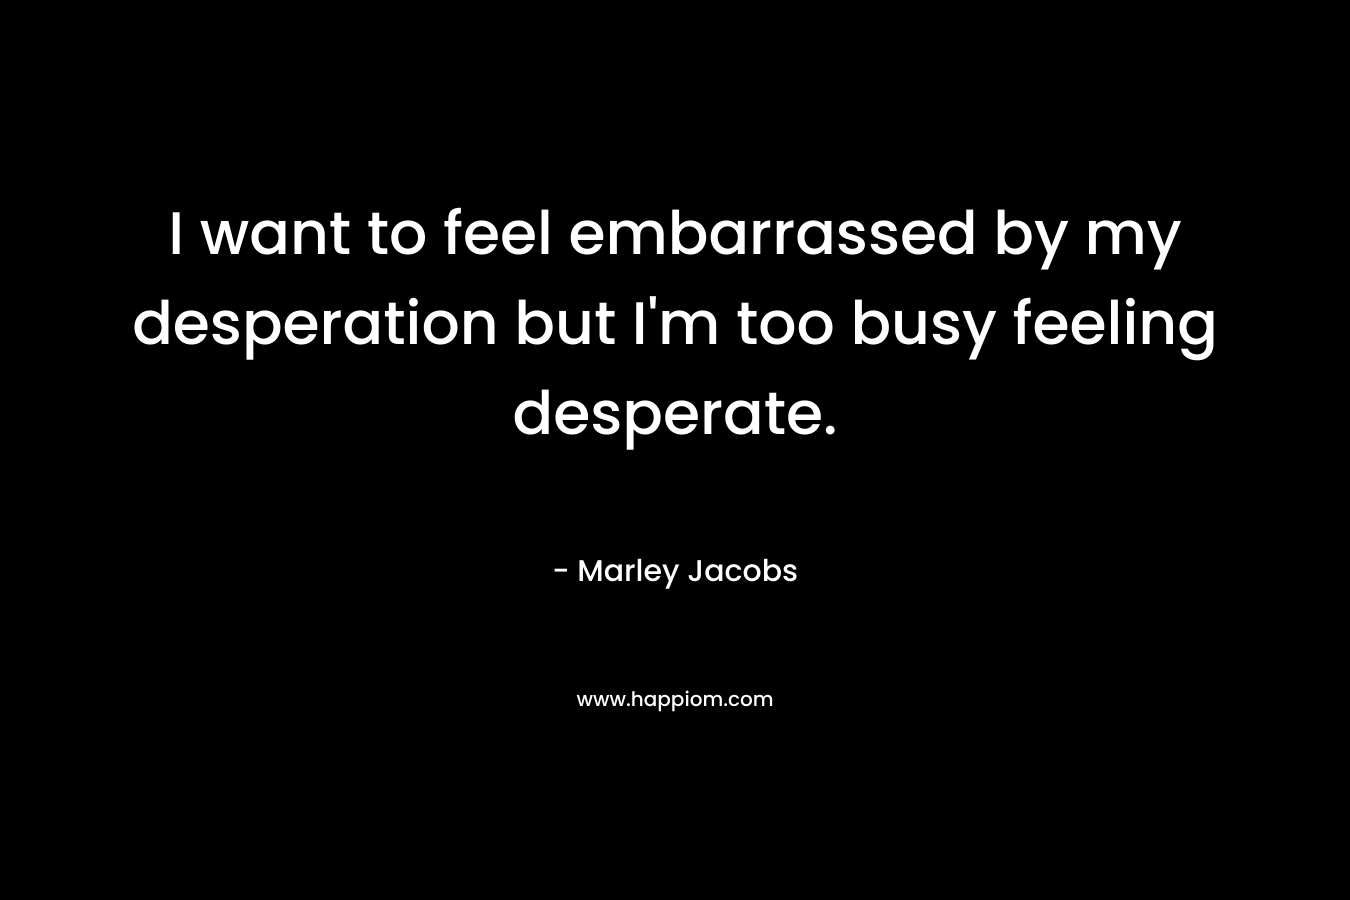 I want to feel embarrassed by my desperation but I’m too busy feeling desperate. – Marley Jacobs